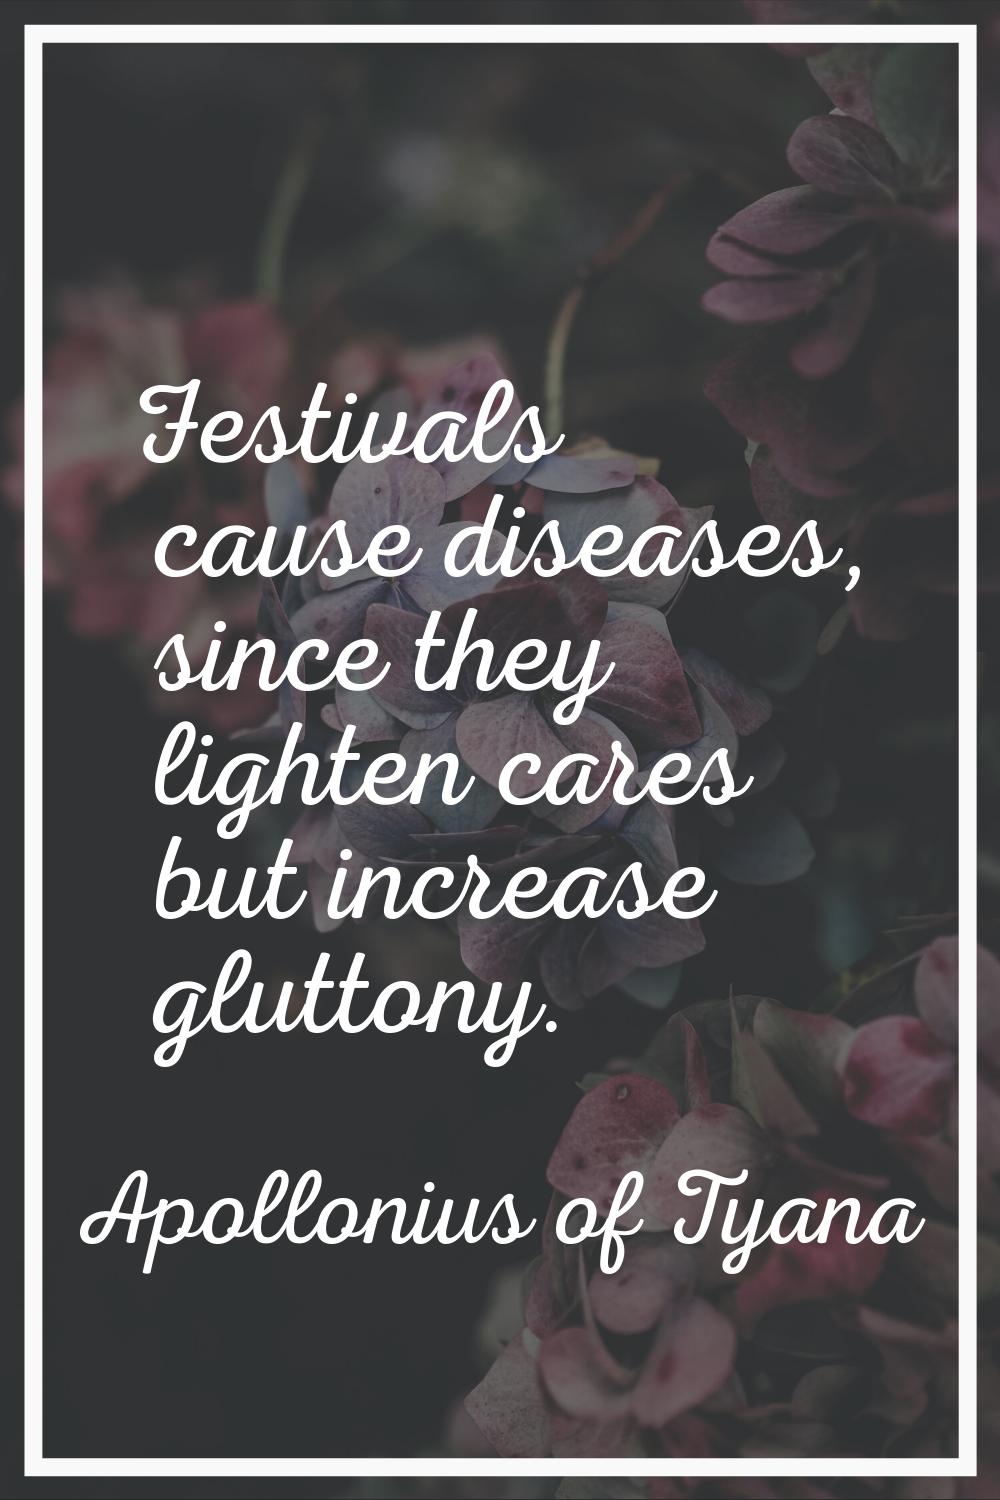 Festivals cause diseases, since they lighten cares but increase gluttony.